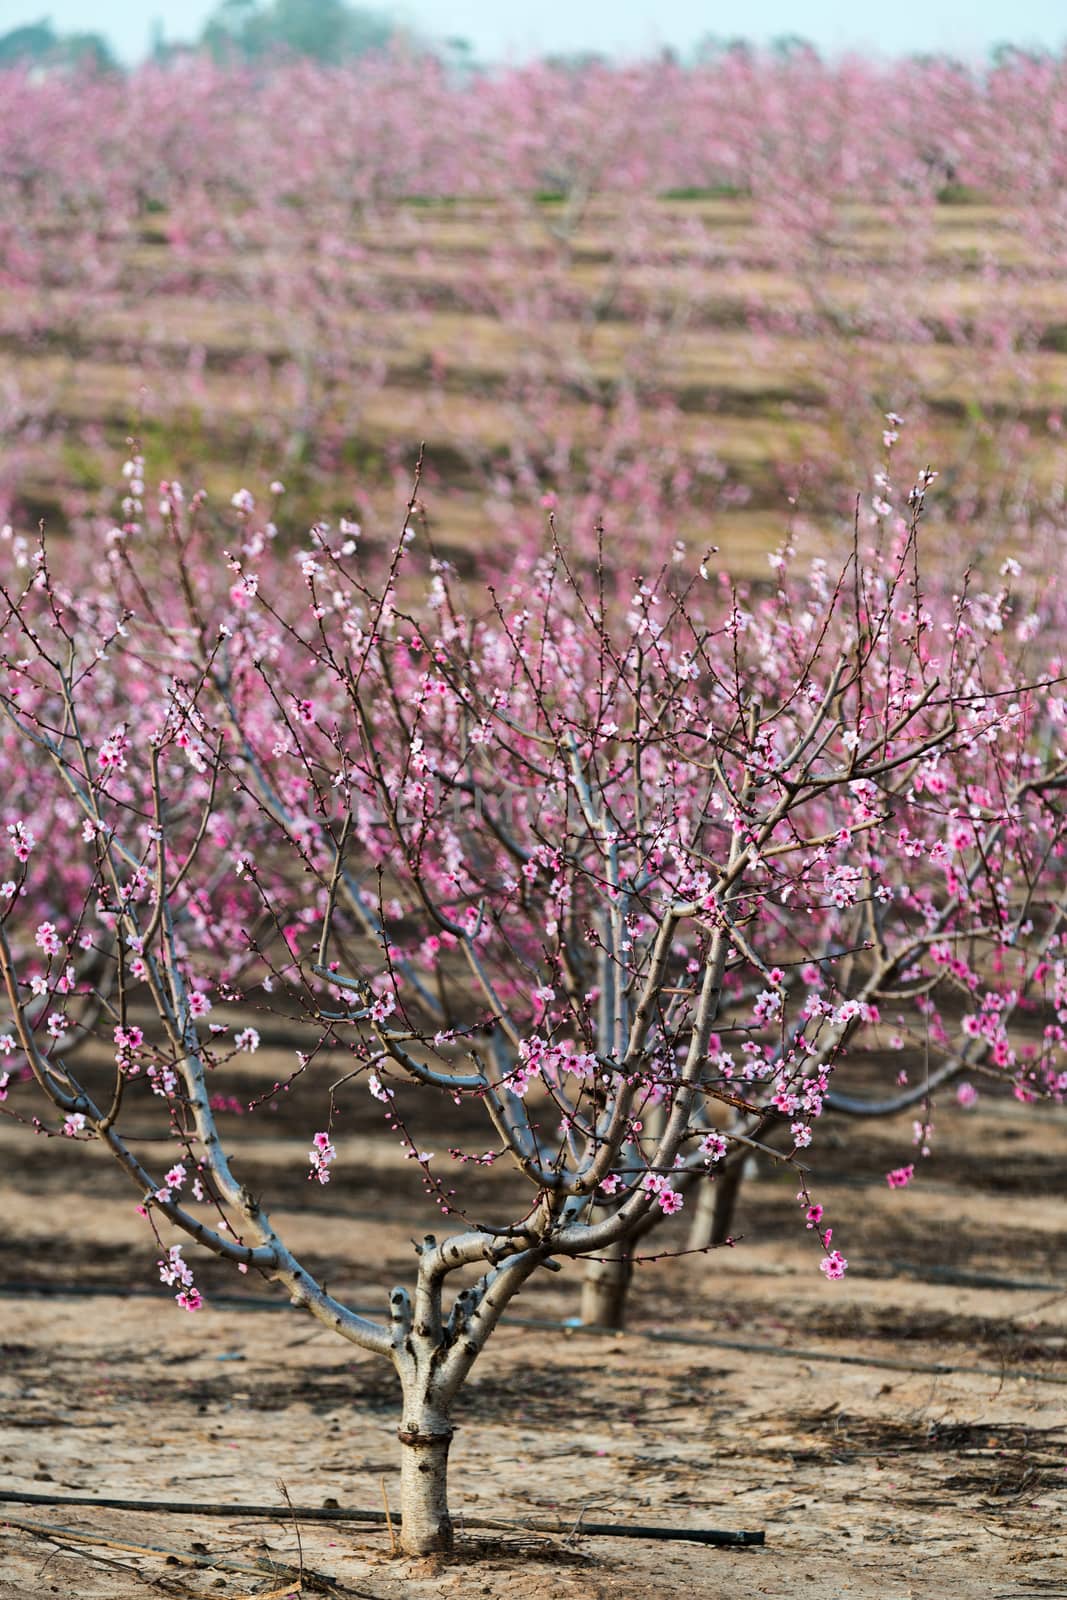 rural landscape, blooming peach garden, agricultural industry